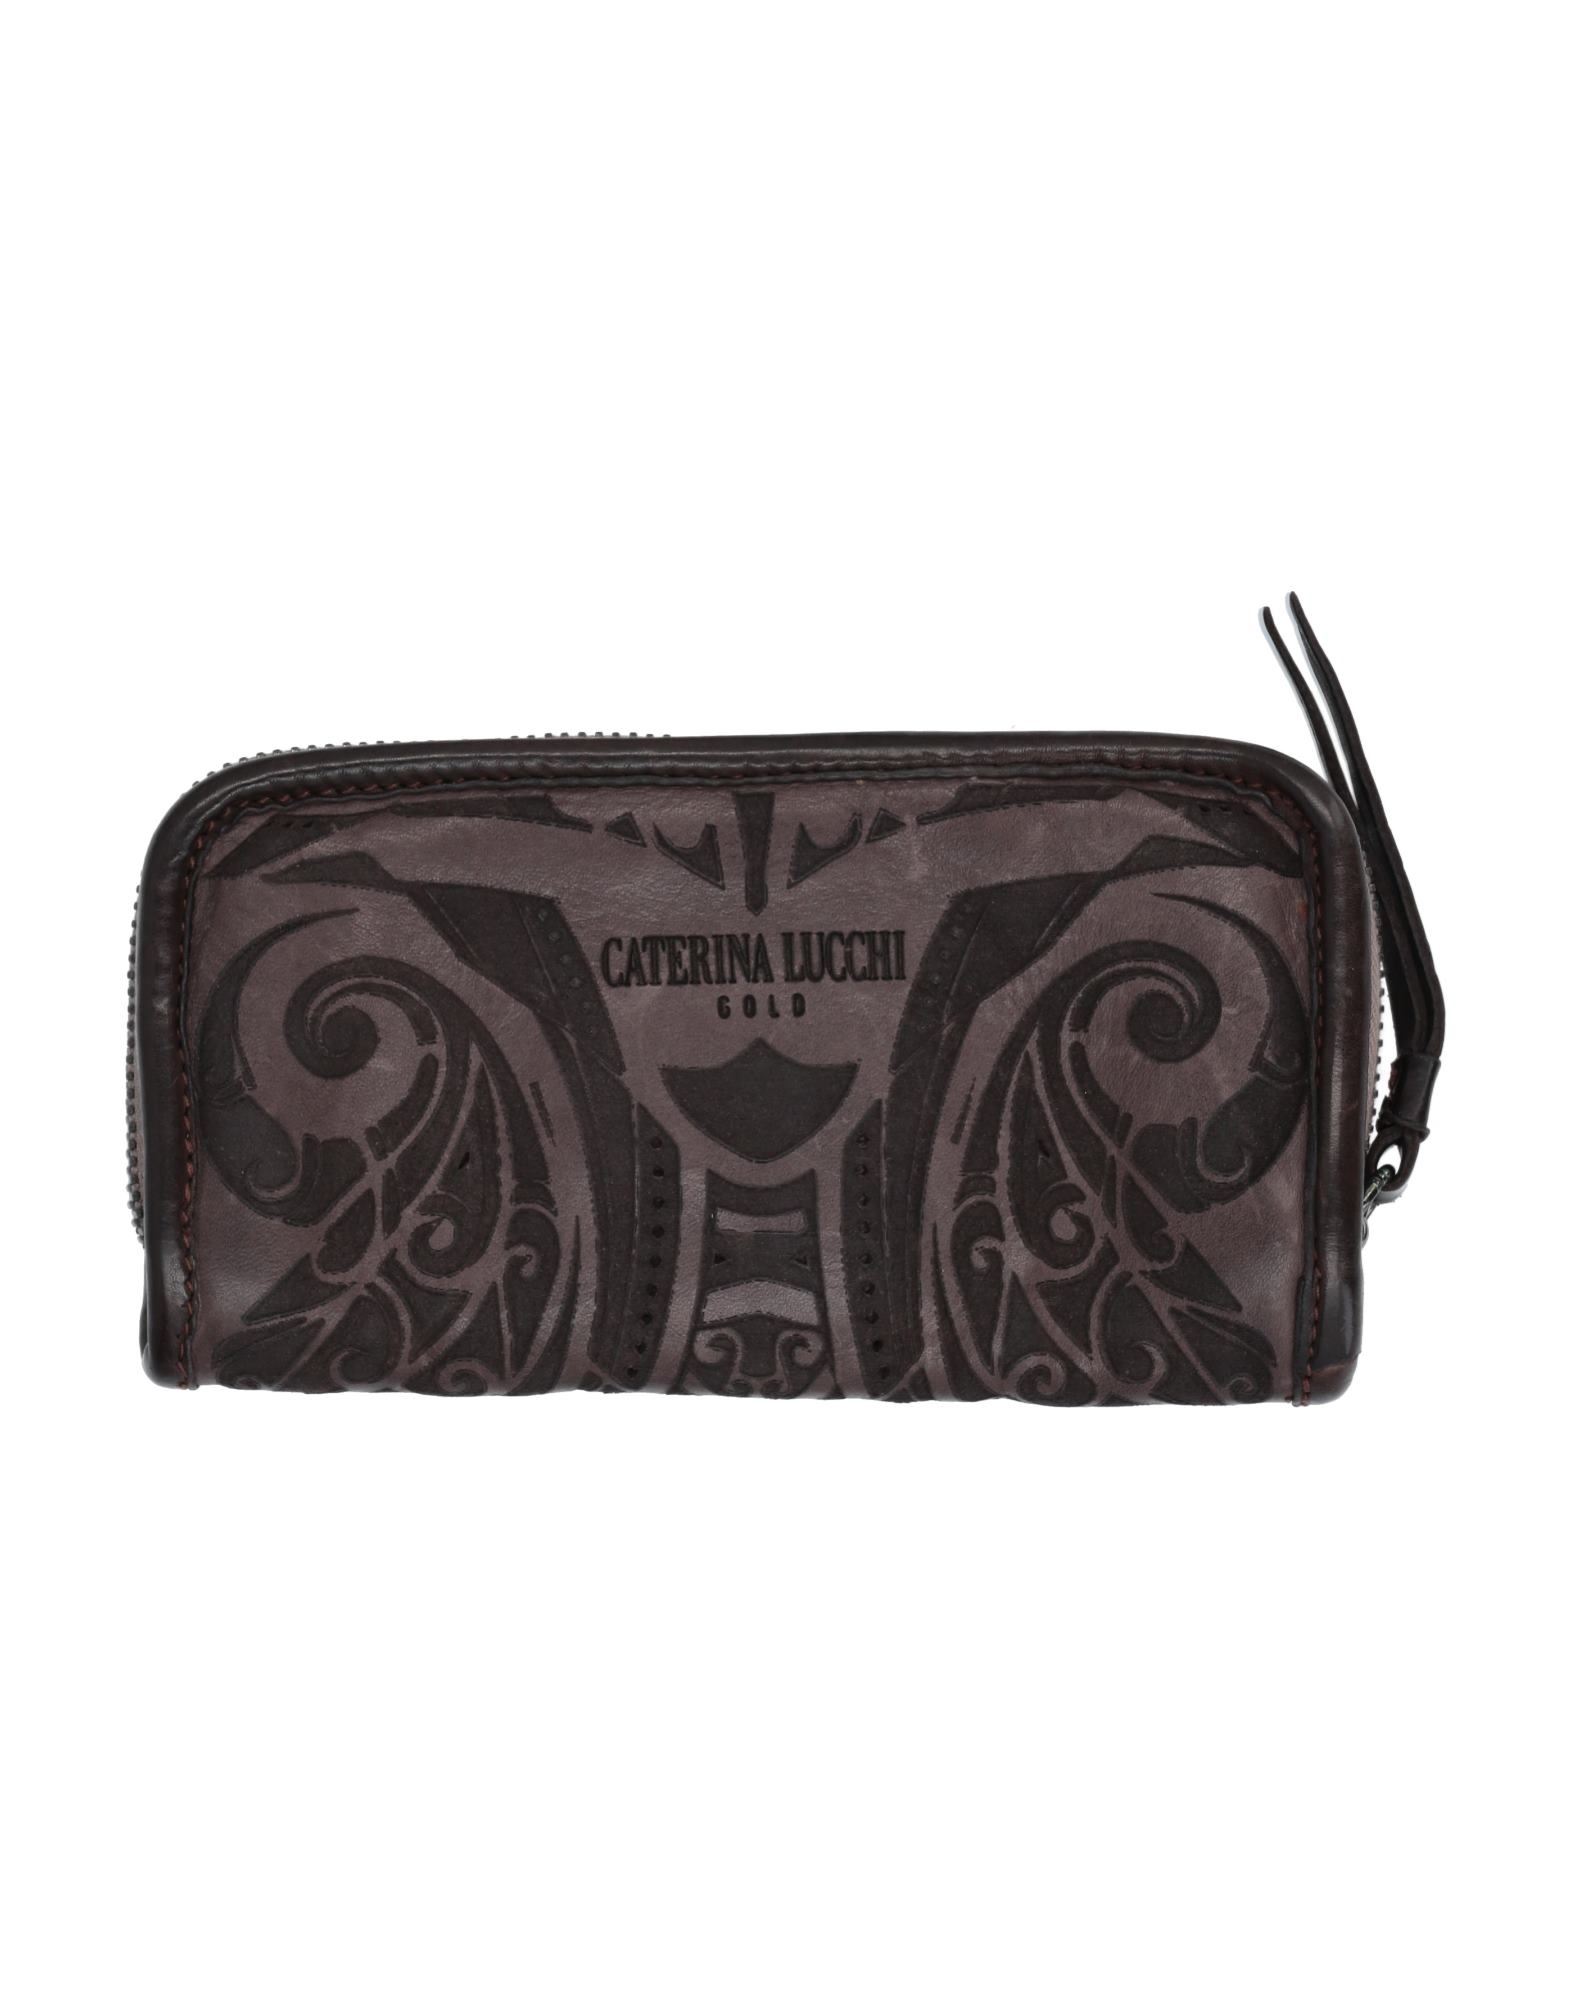 Caterina Lucchi Wallets In Dove Grey